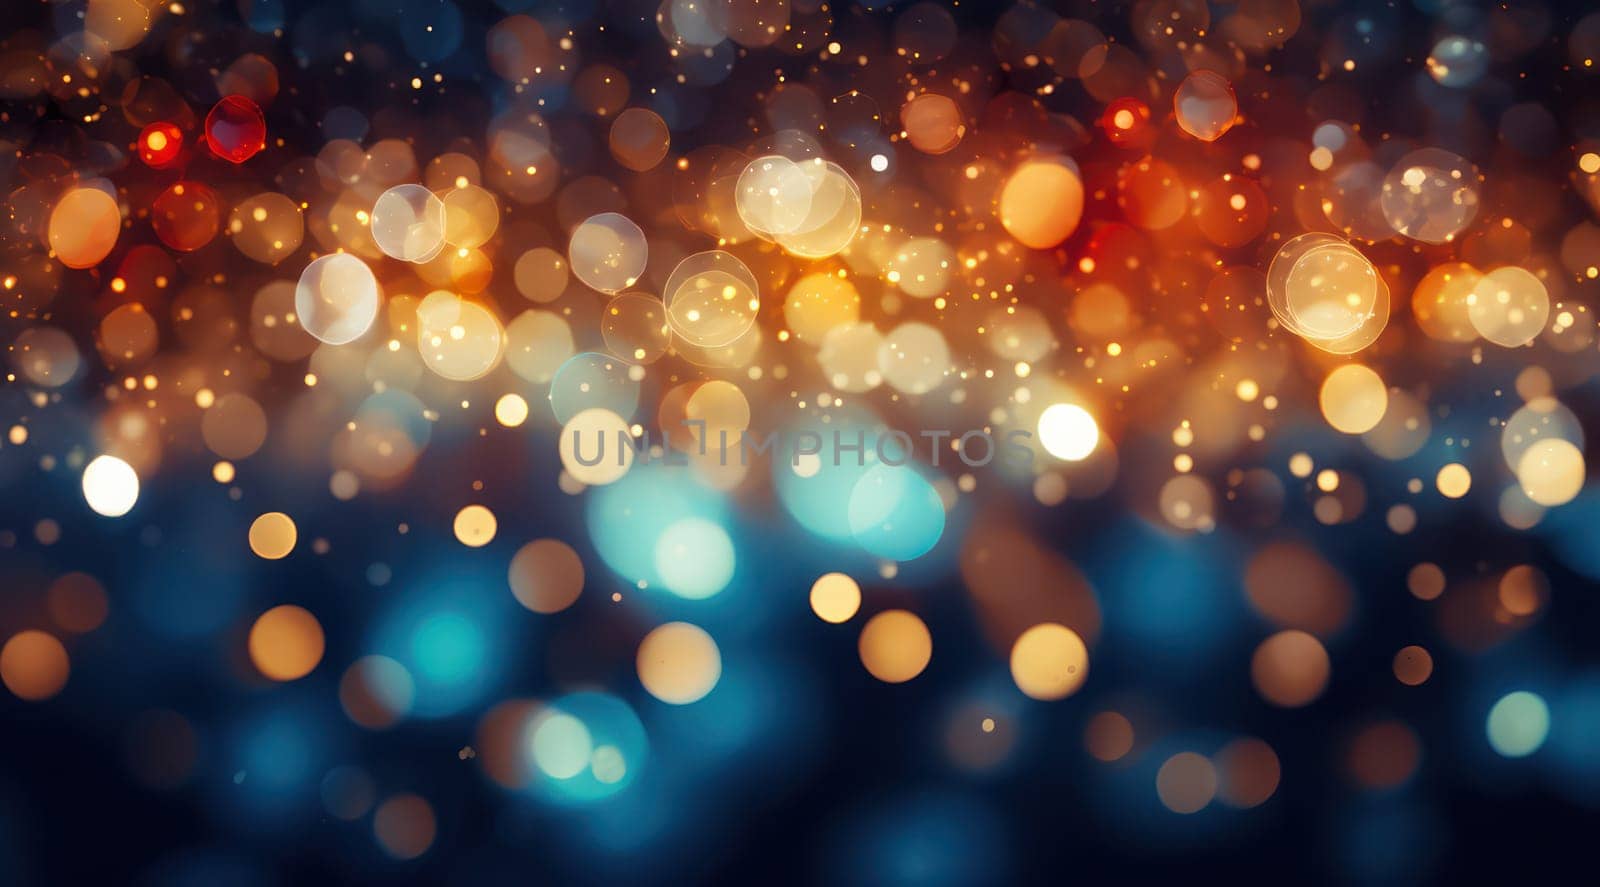 Shimmering Christmas Magic: Glowing Abstract Bokeh Background with Bright, Shiny Space and Festive Defocused Night Design